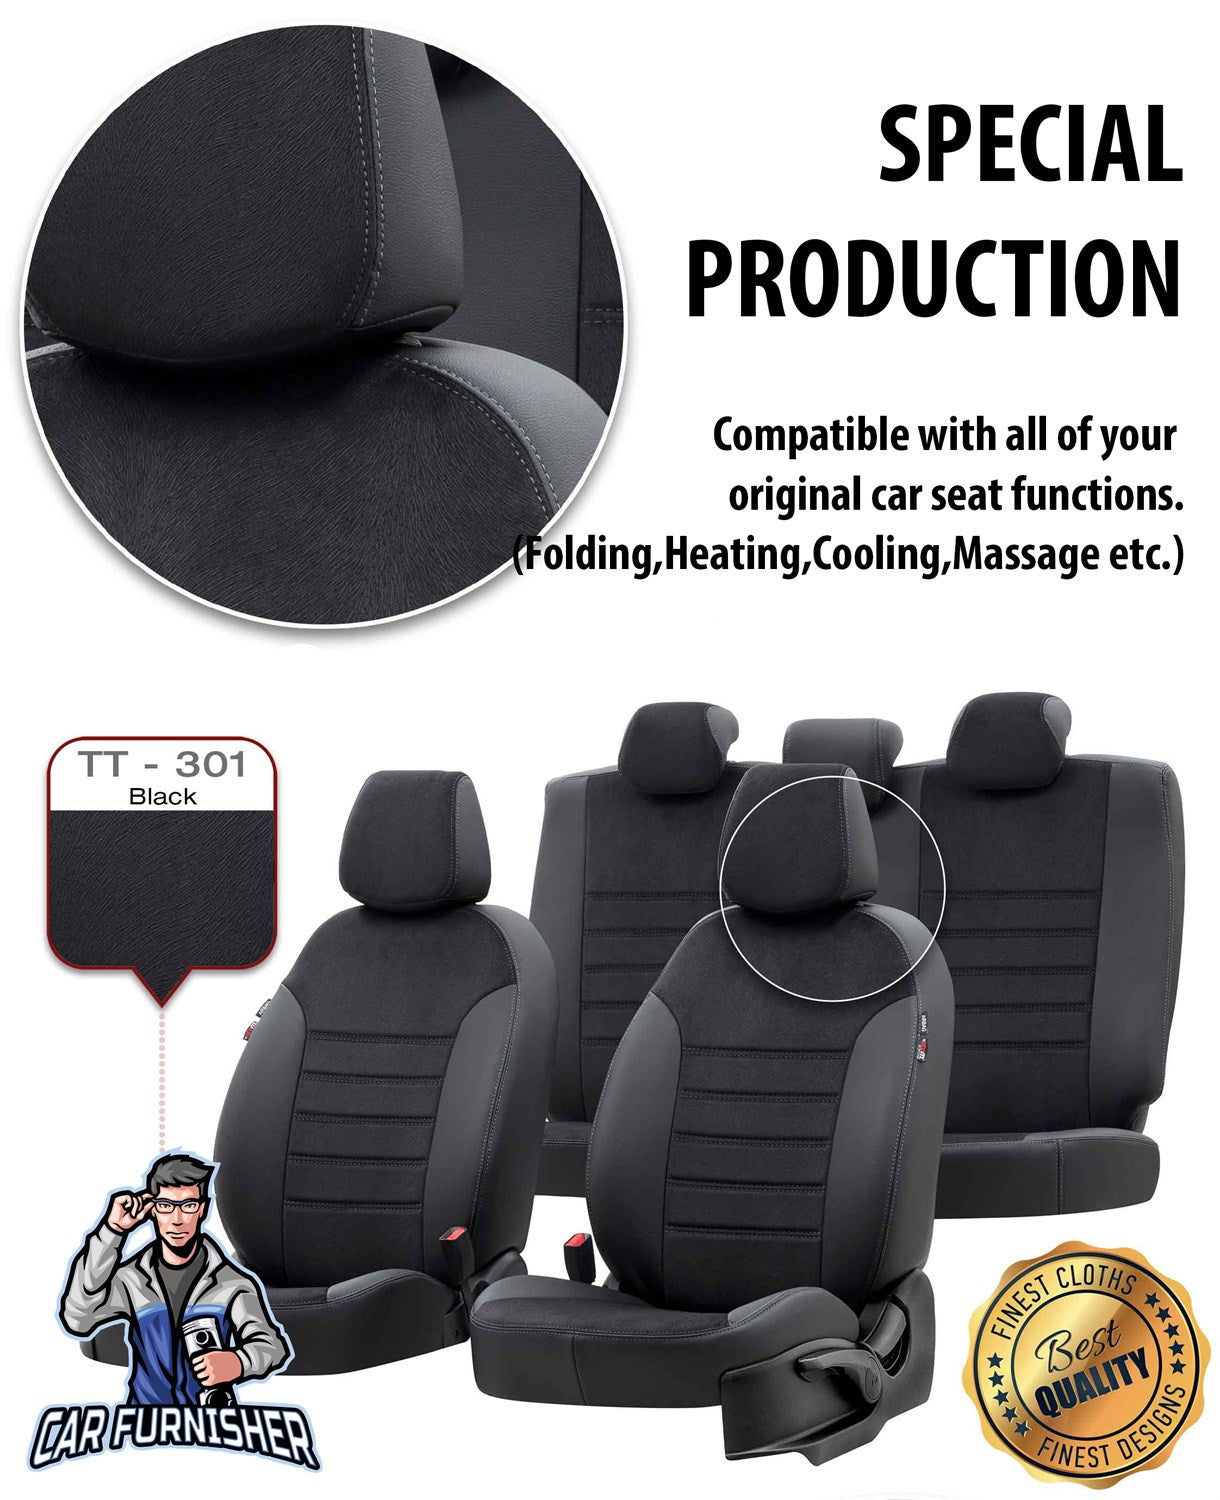 Ford Tourneo Courier Seat Covers London Foal Feather Design Black Leather & Foal Feather